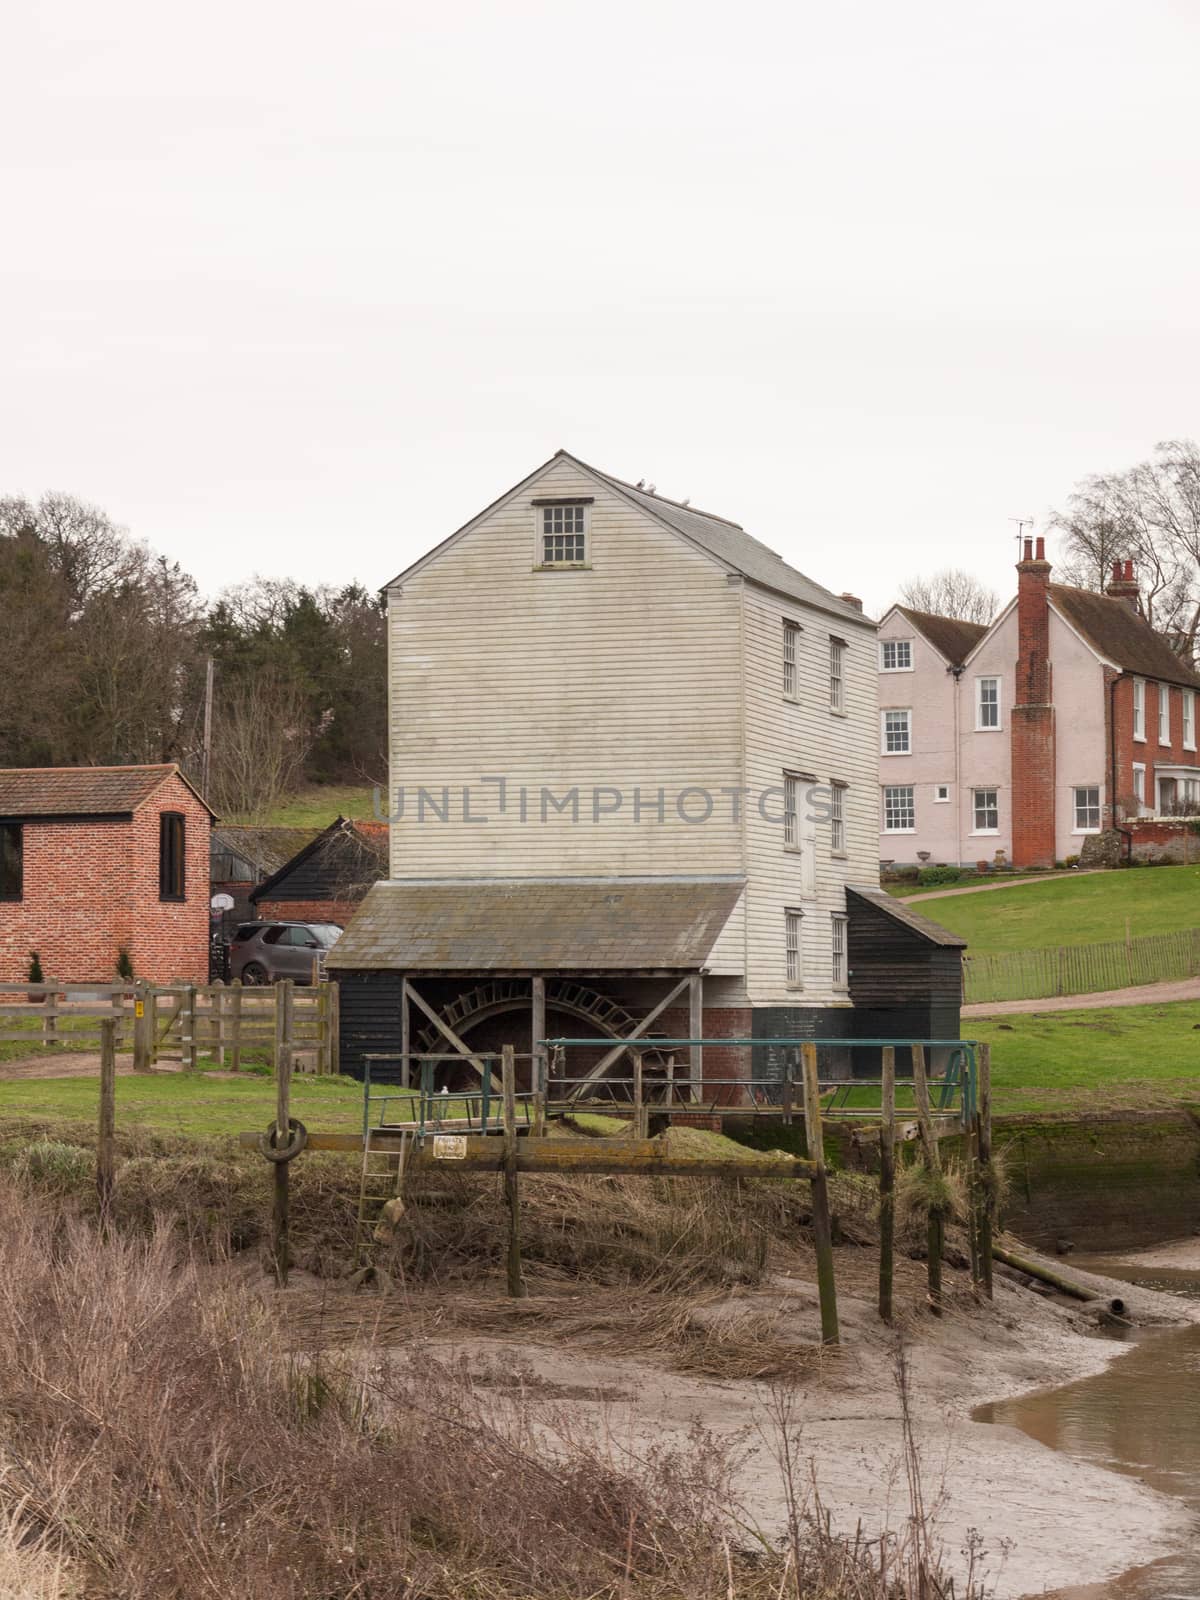 white old wooden watermill house farm private uk by callumrc